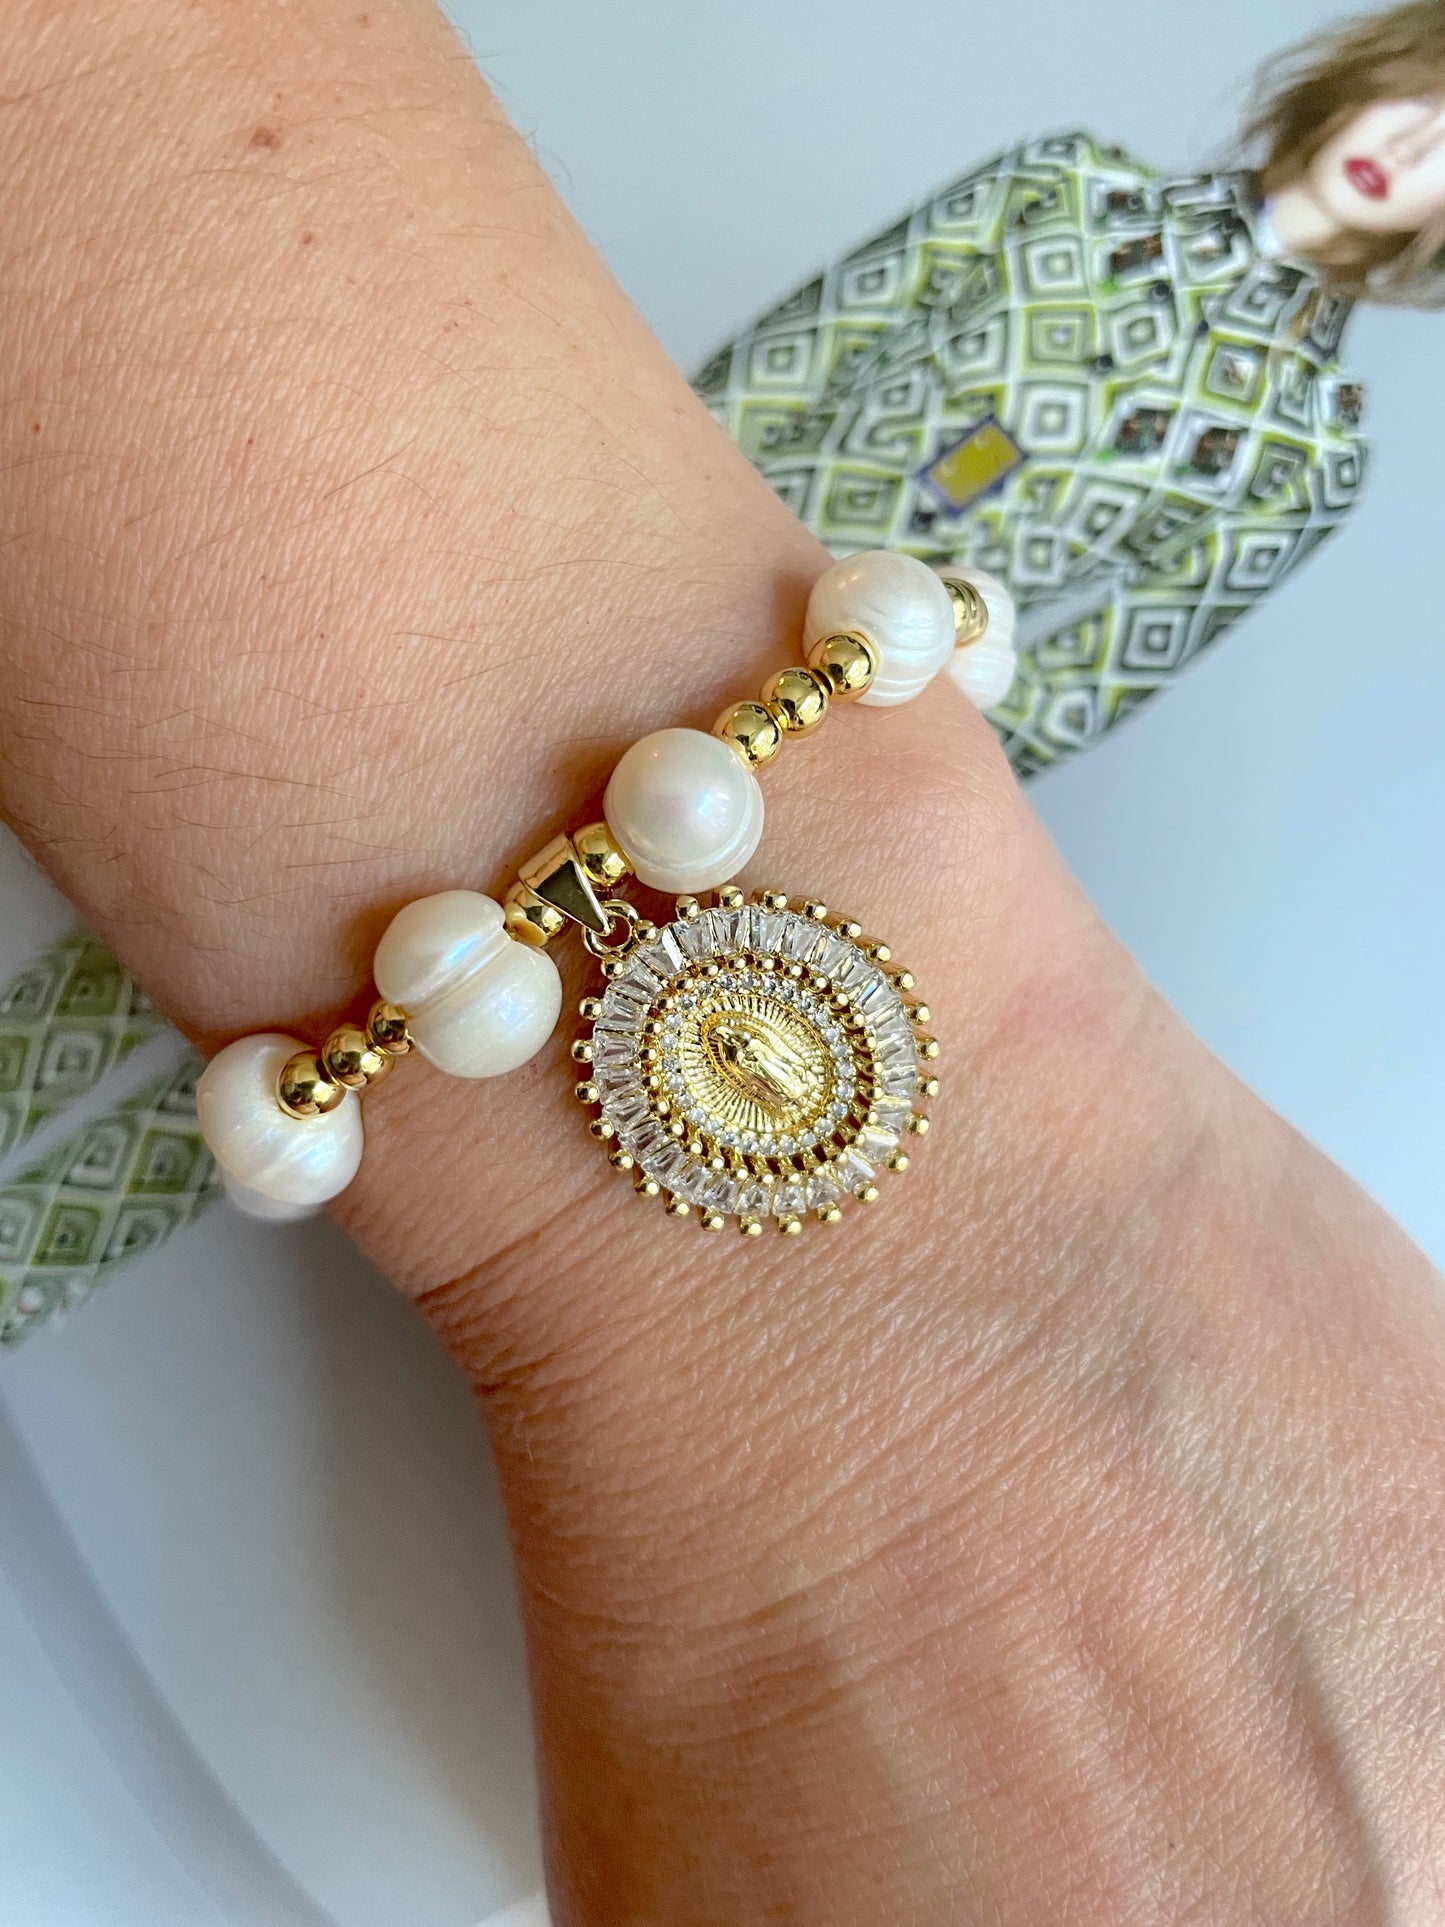 Natural Pearls - Our Lady of Guadalupe Medal Bracelet